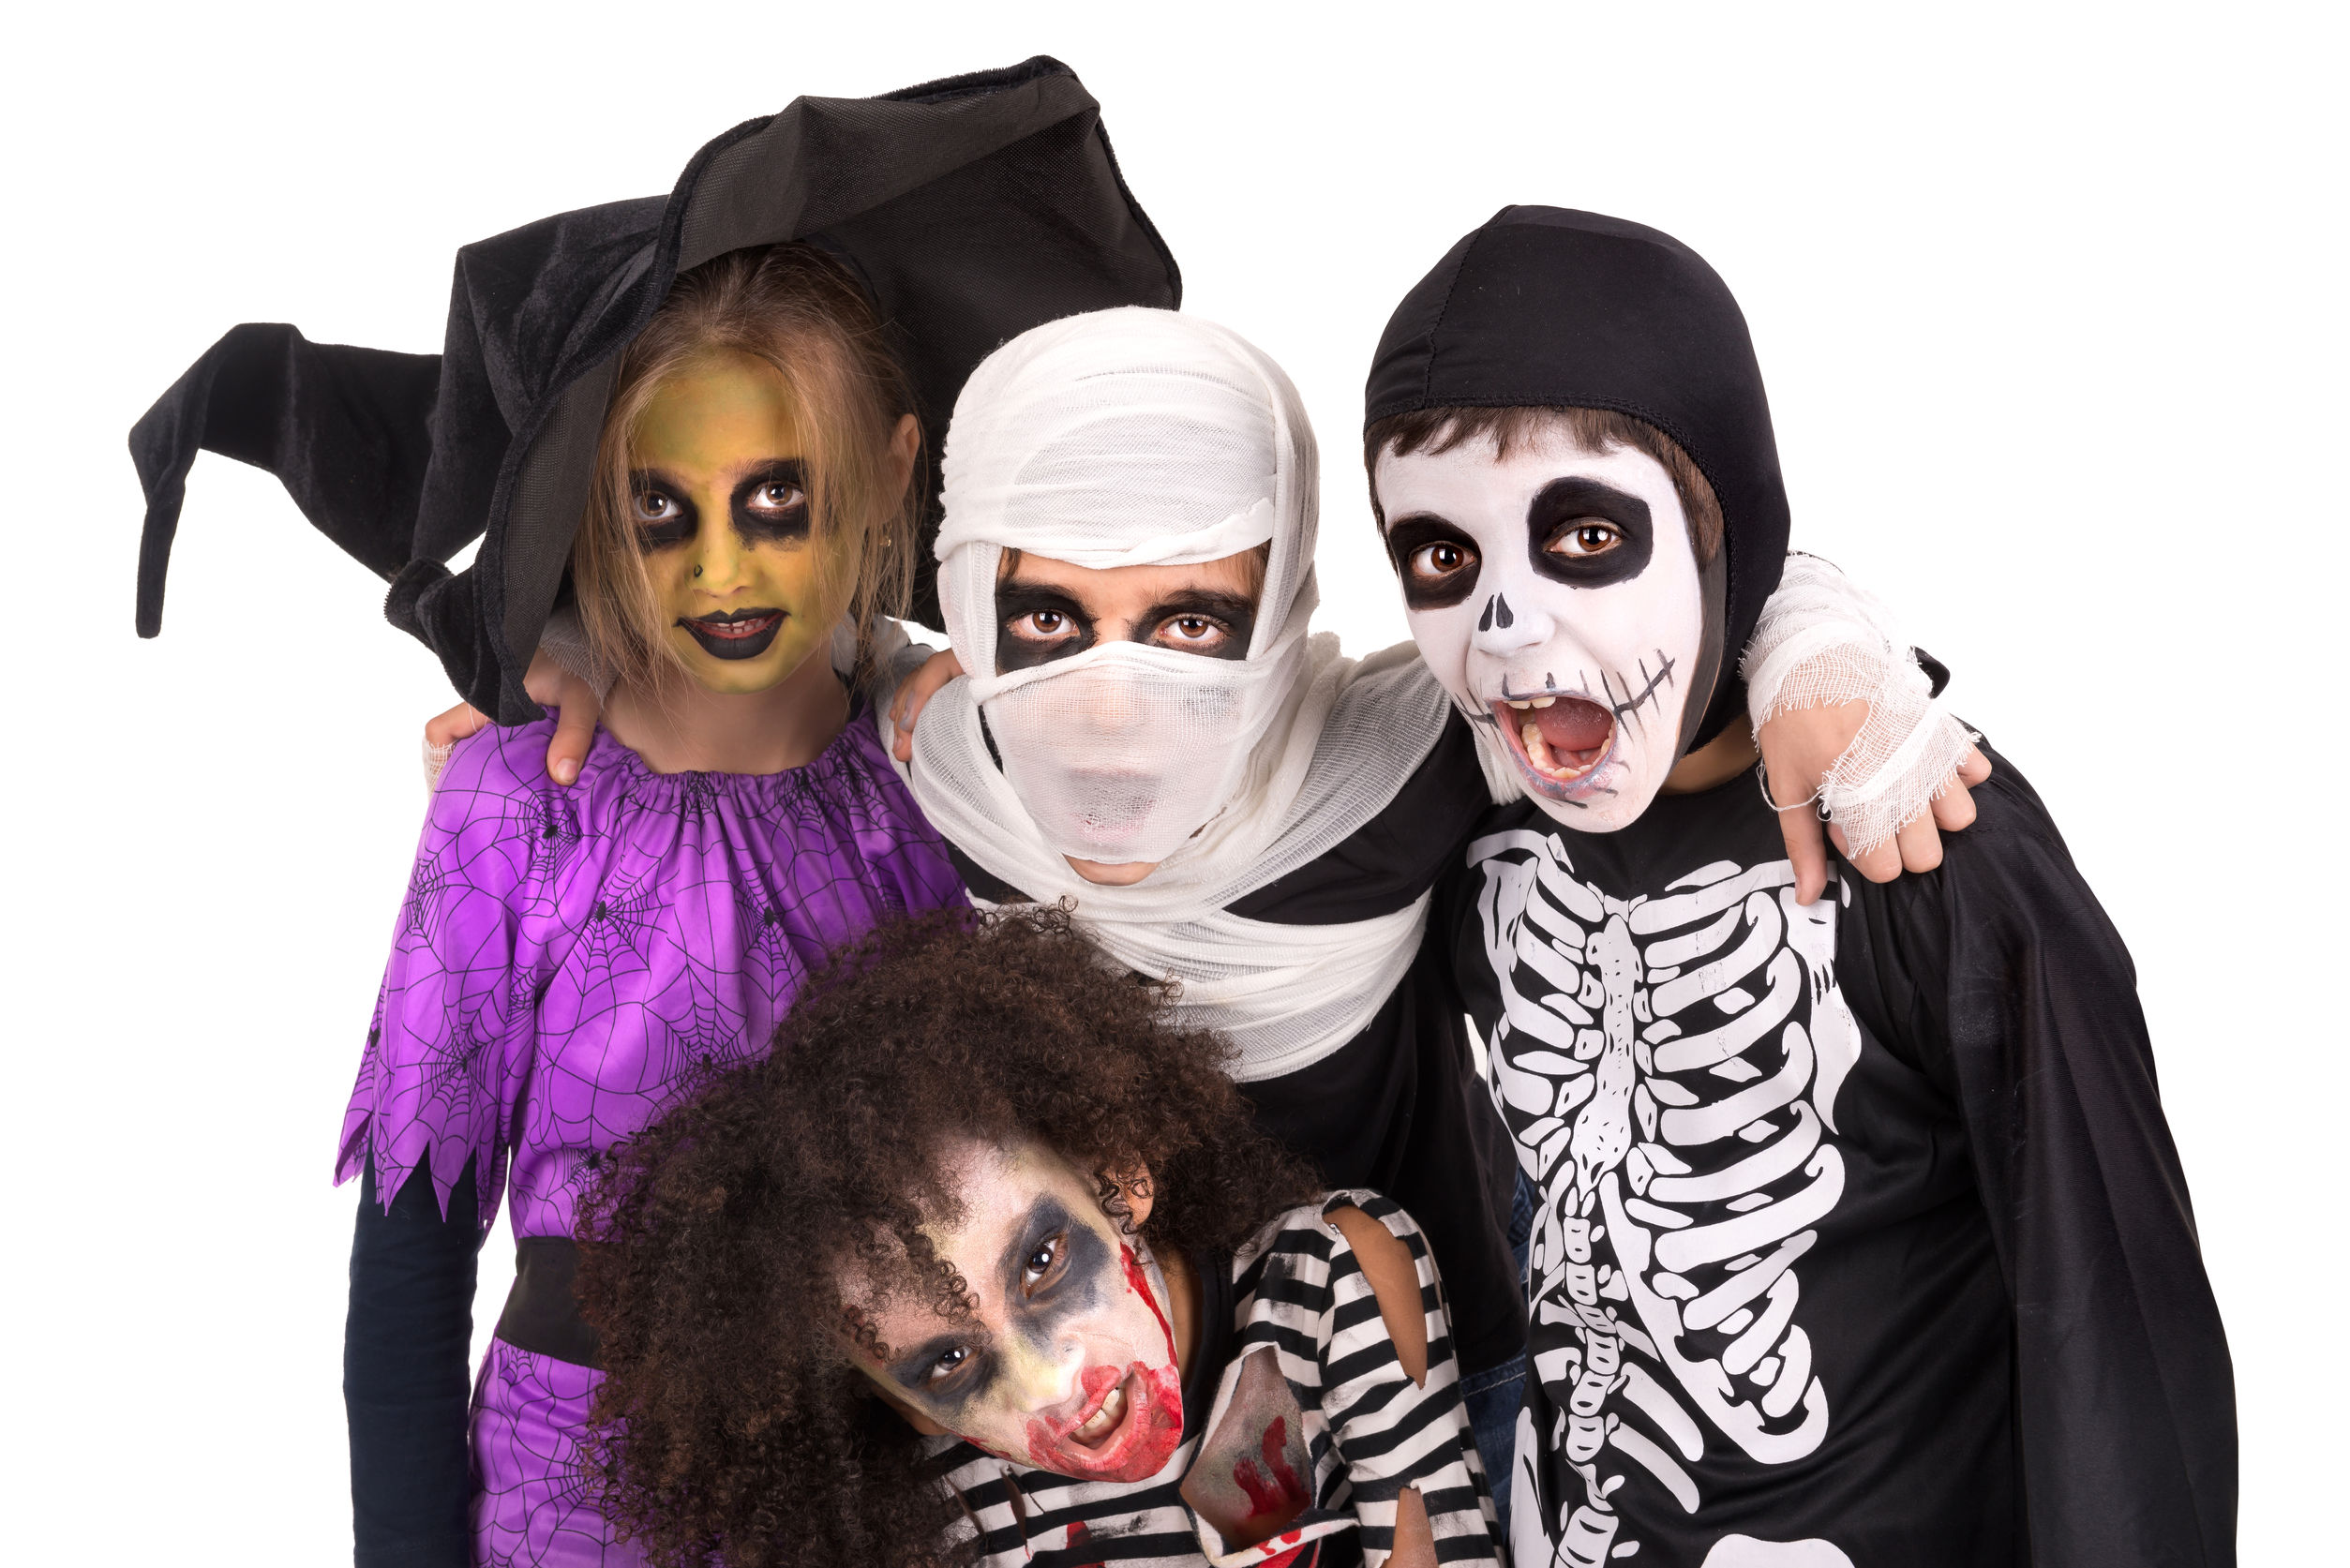 A group of children dressed in Halloween costumes